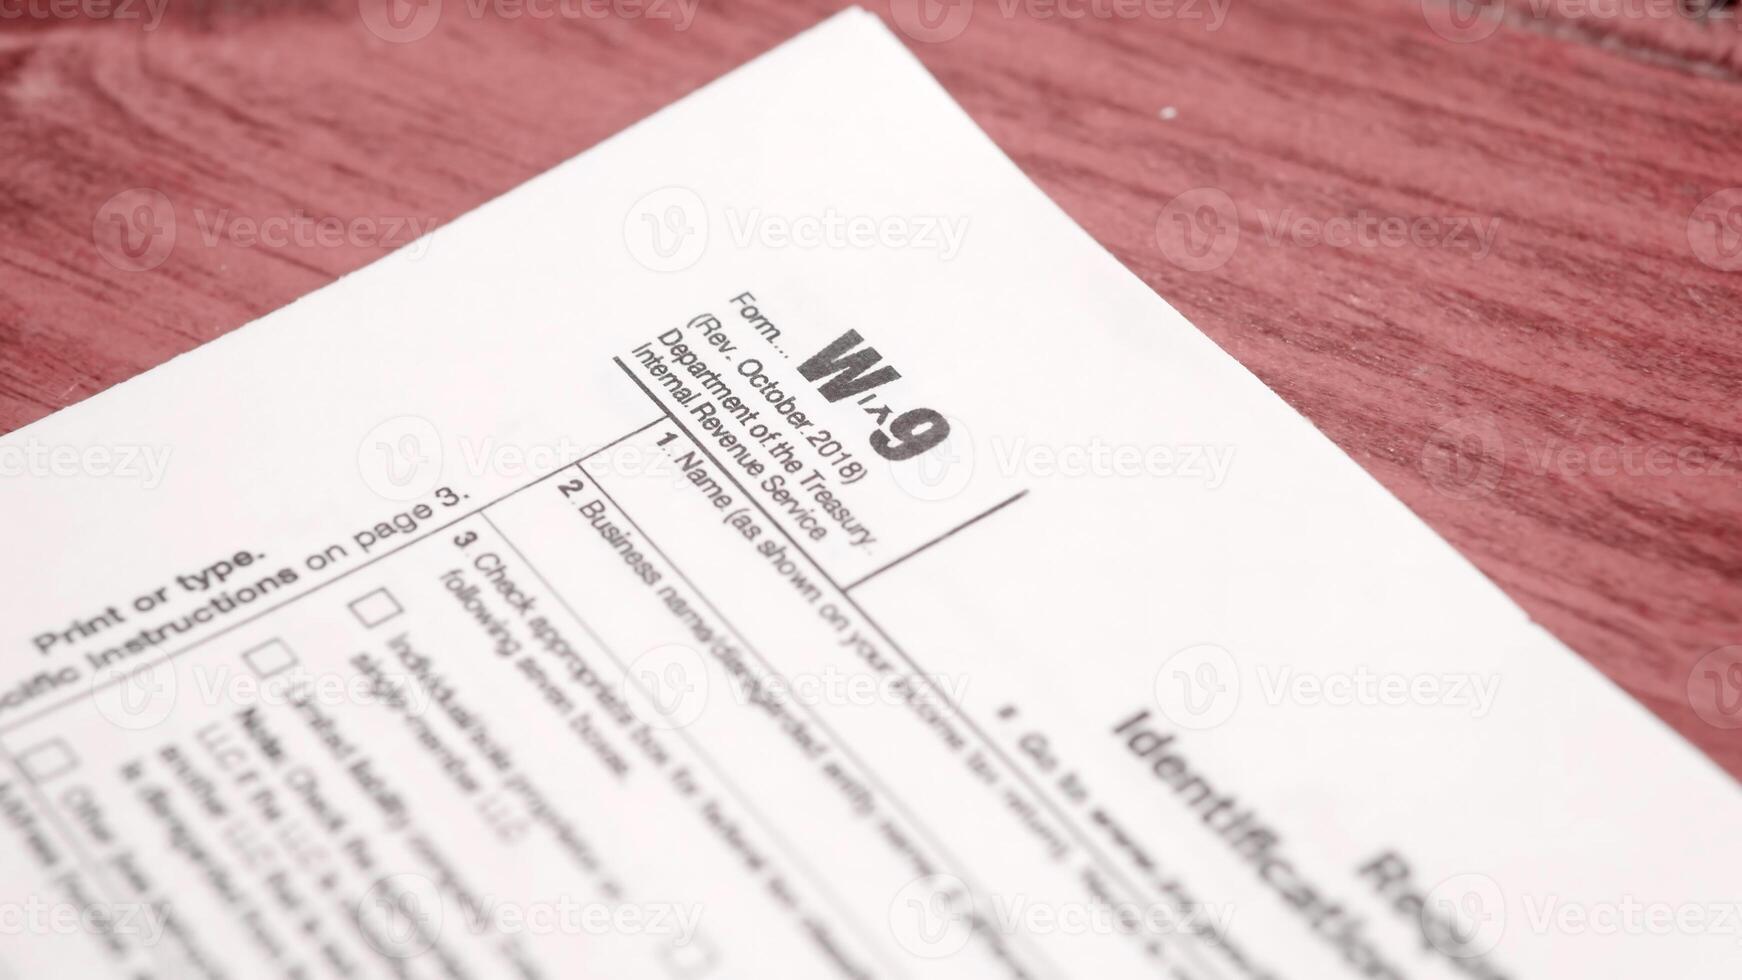 W-9 tax form as a business concept photo